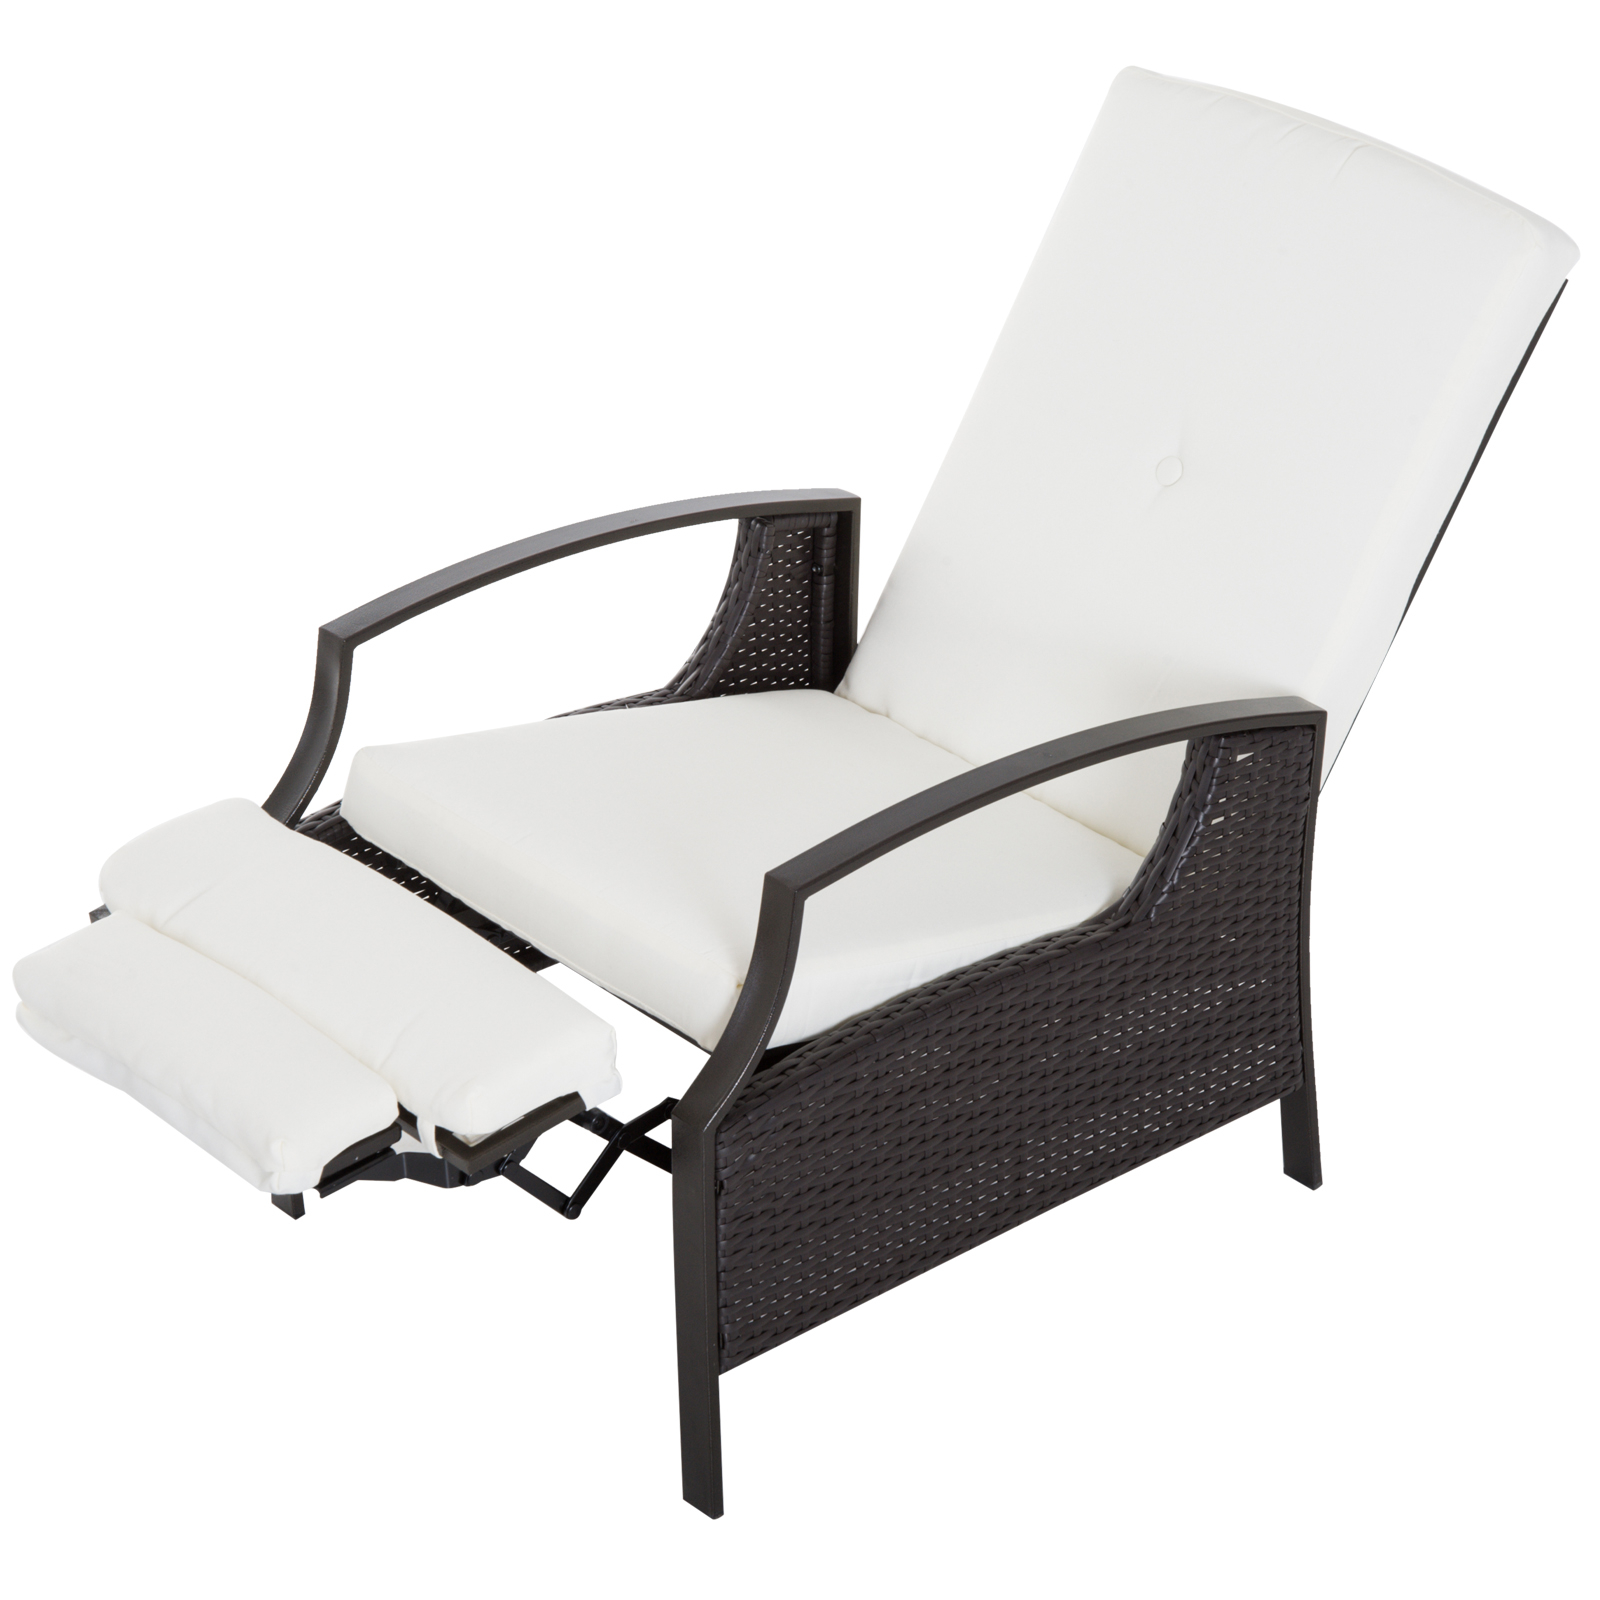 Outdoor Recliners Visualhunt, Outdoor Reclining Patio Chair Cushions